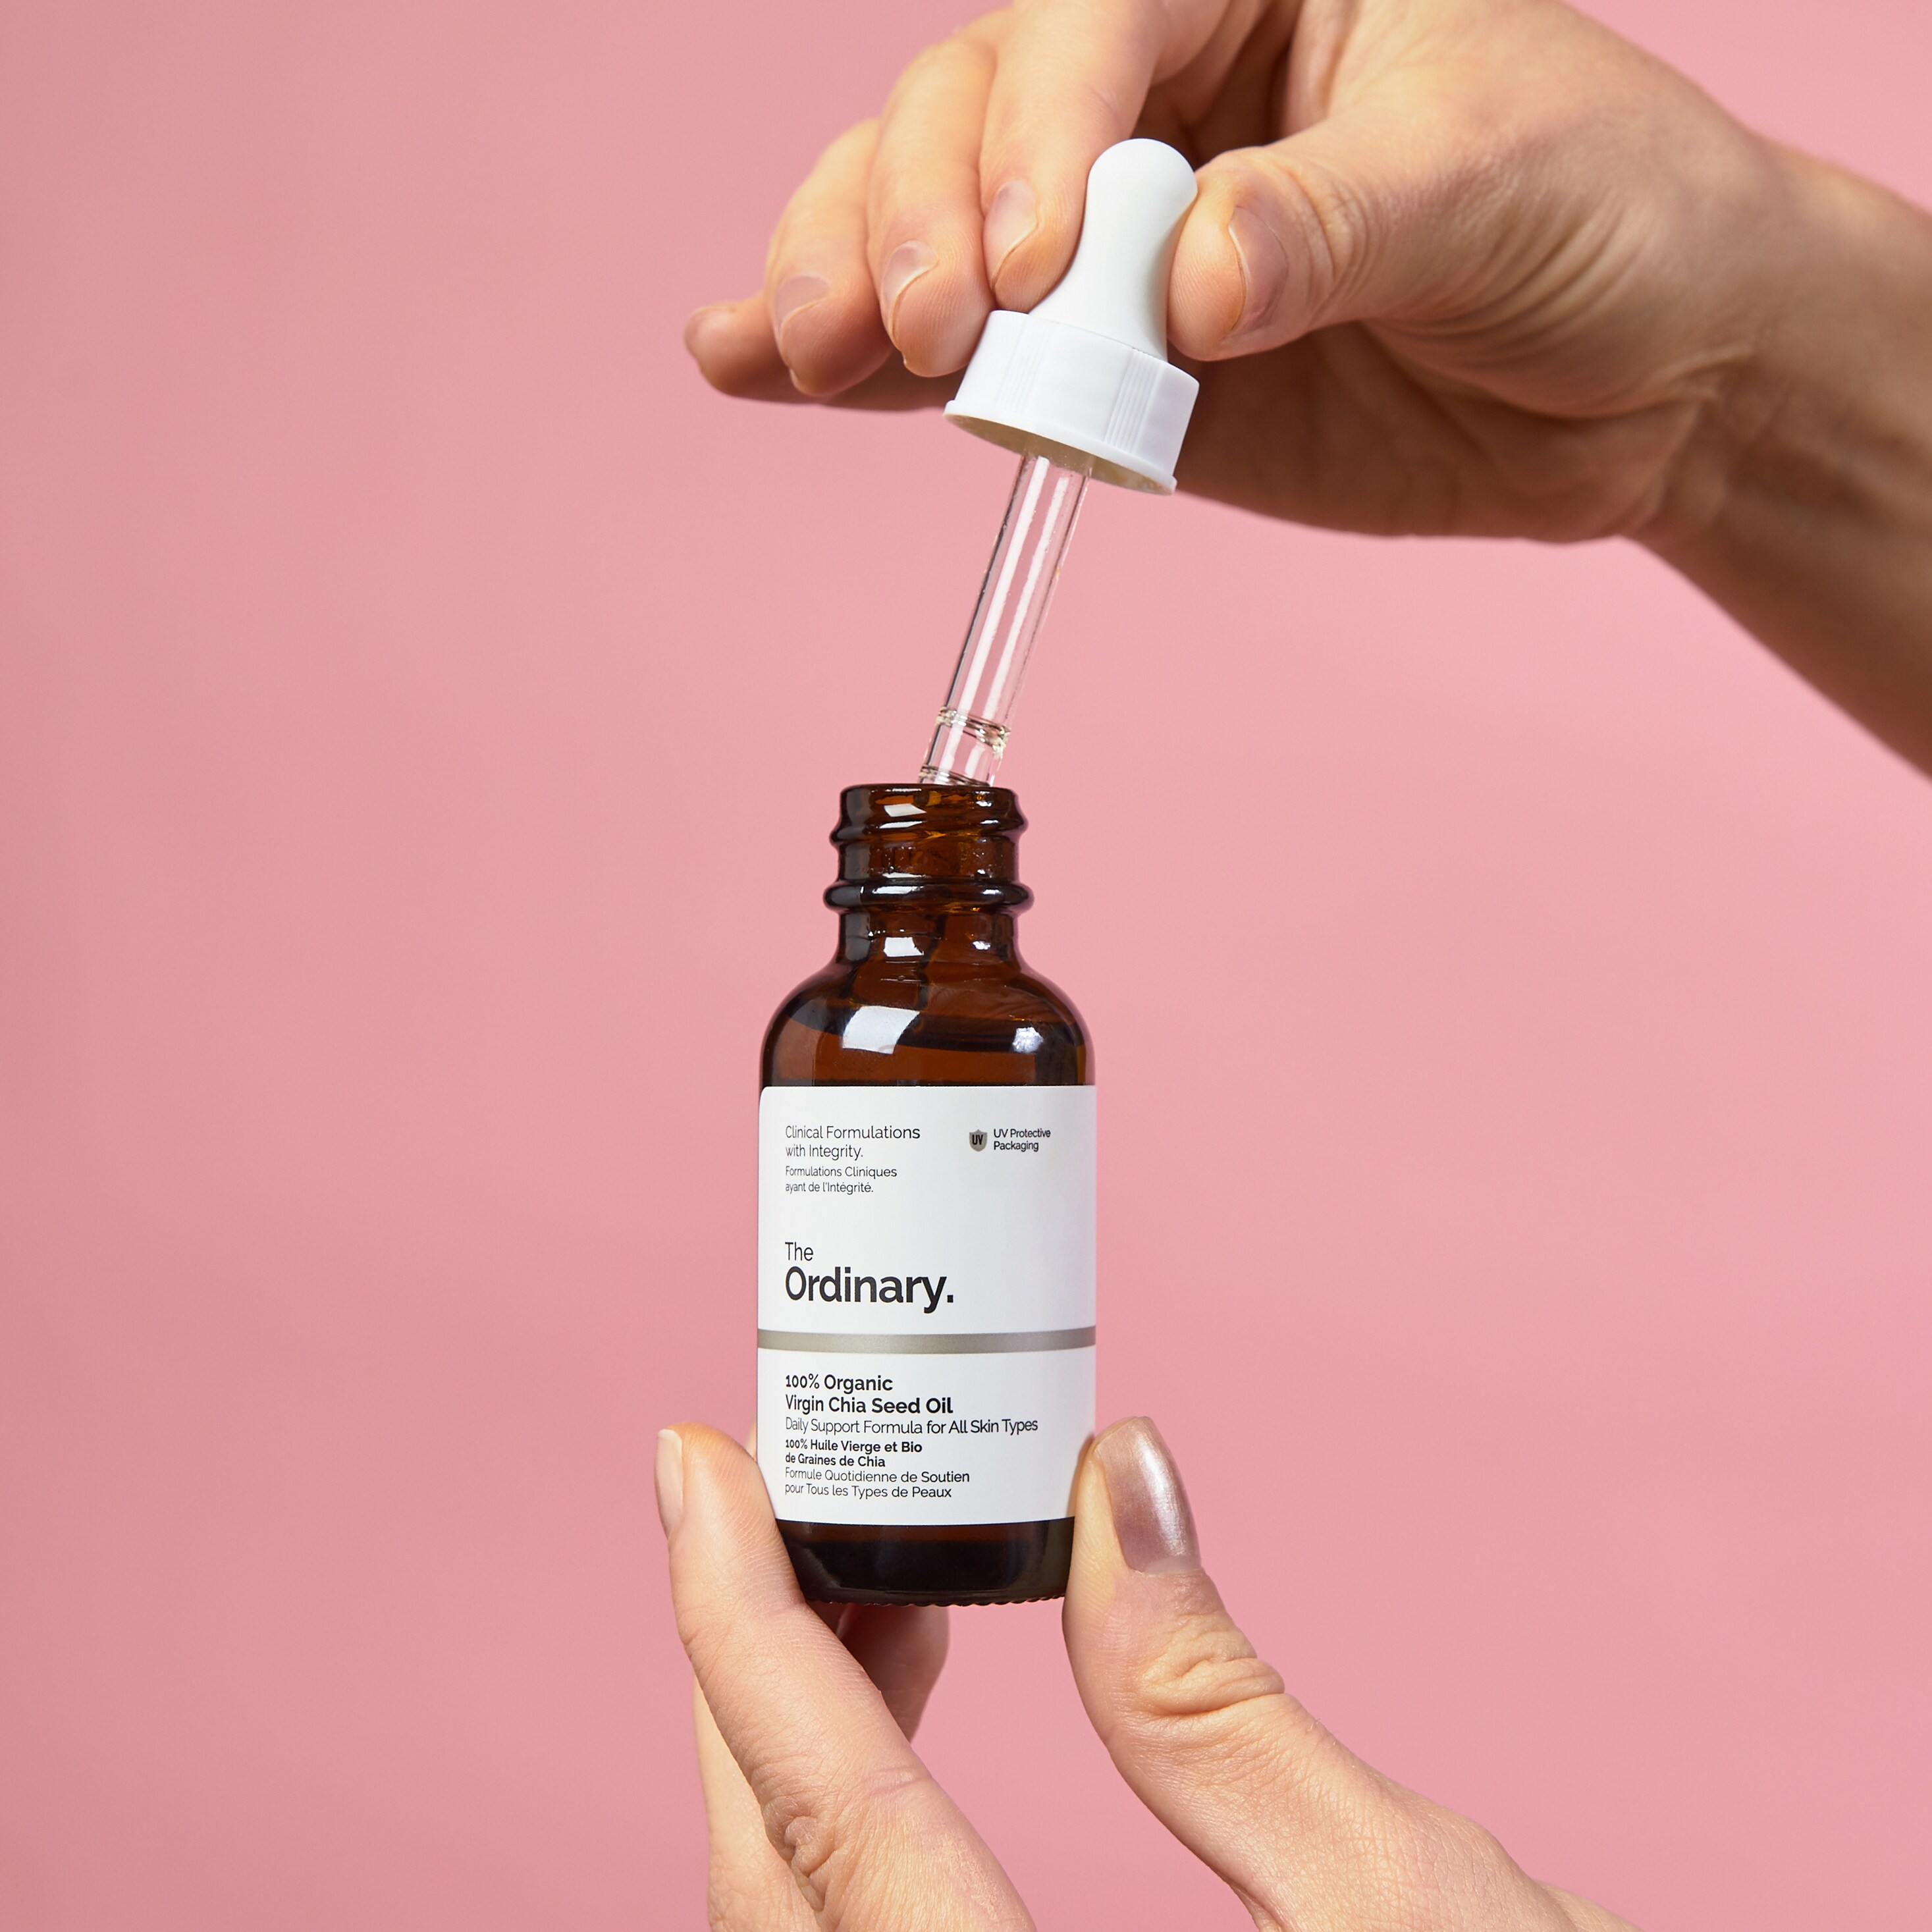 The Ordinary Virgin Chia Seed Oil | ASOS Style Feed